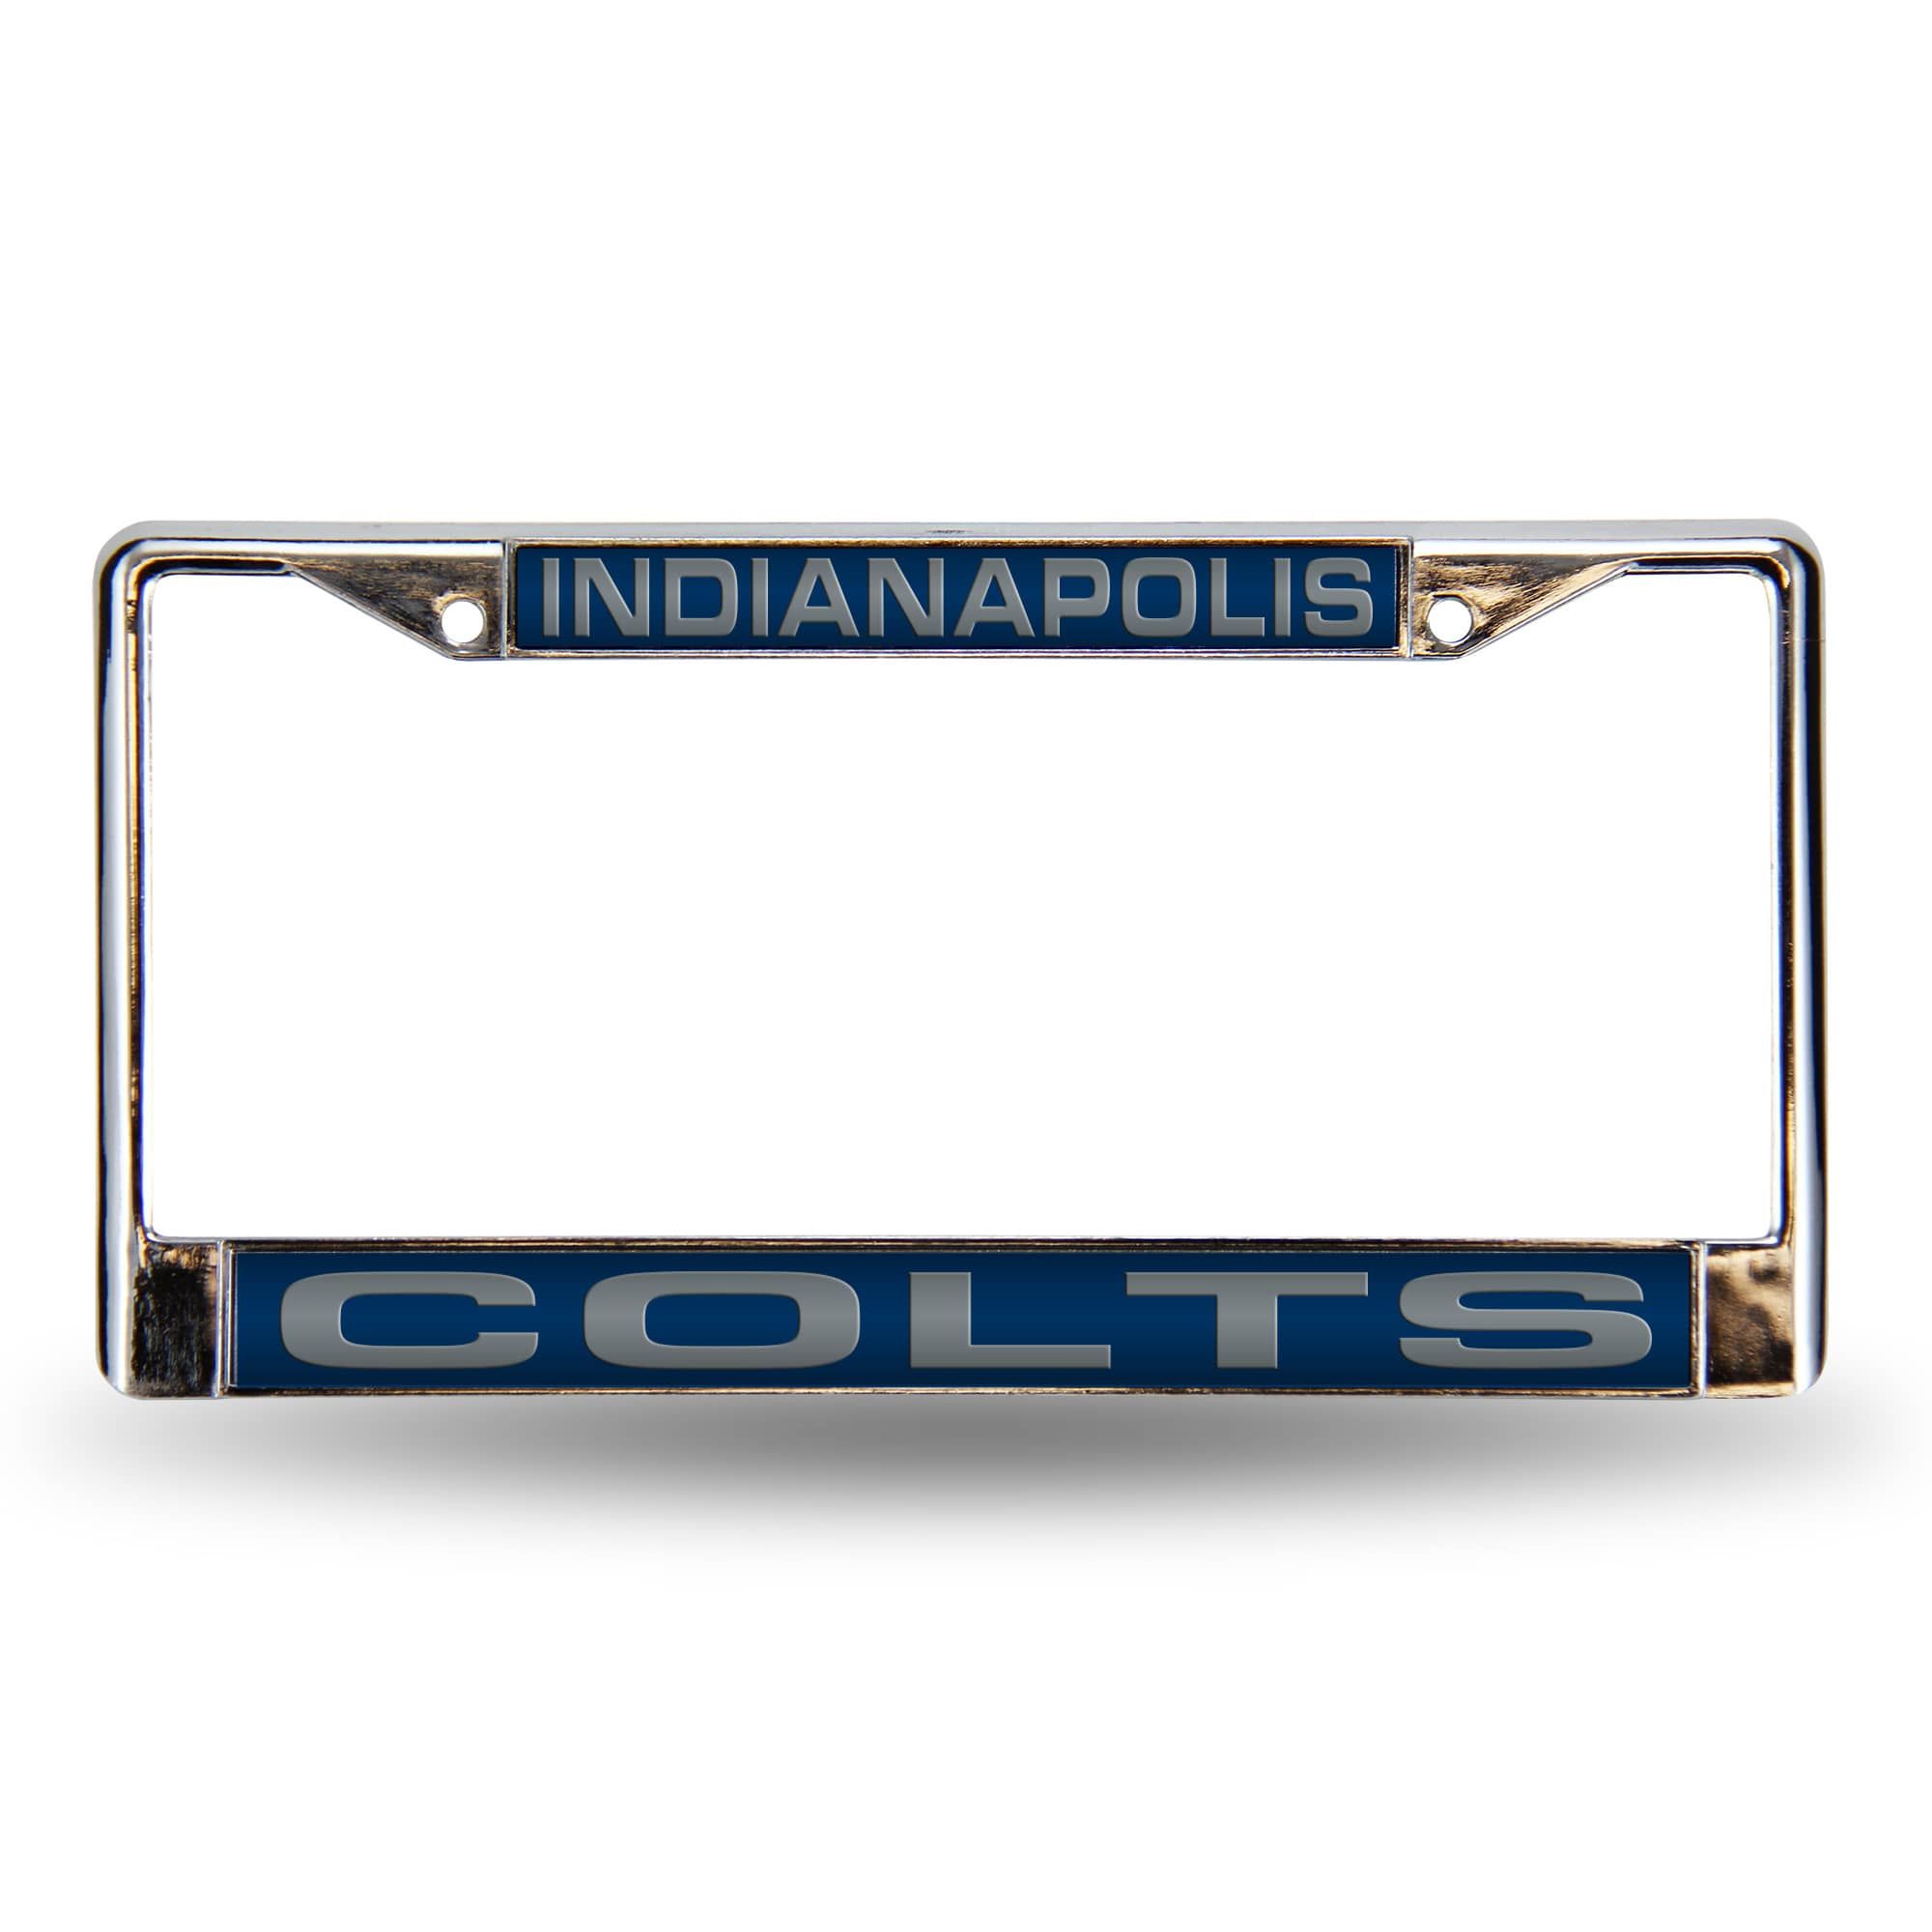 Rico 6" x 12" Gray and Blue NFL Indianapolis Colts Rectangular License Plate Cover